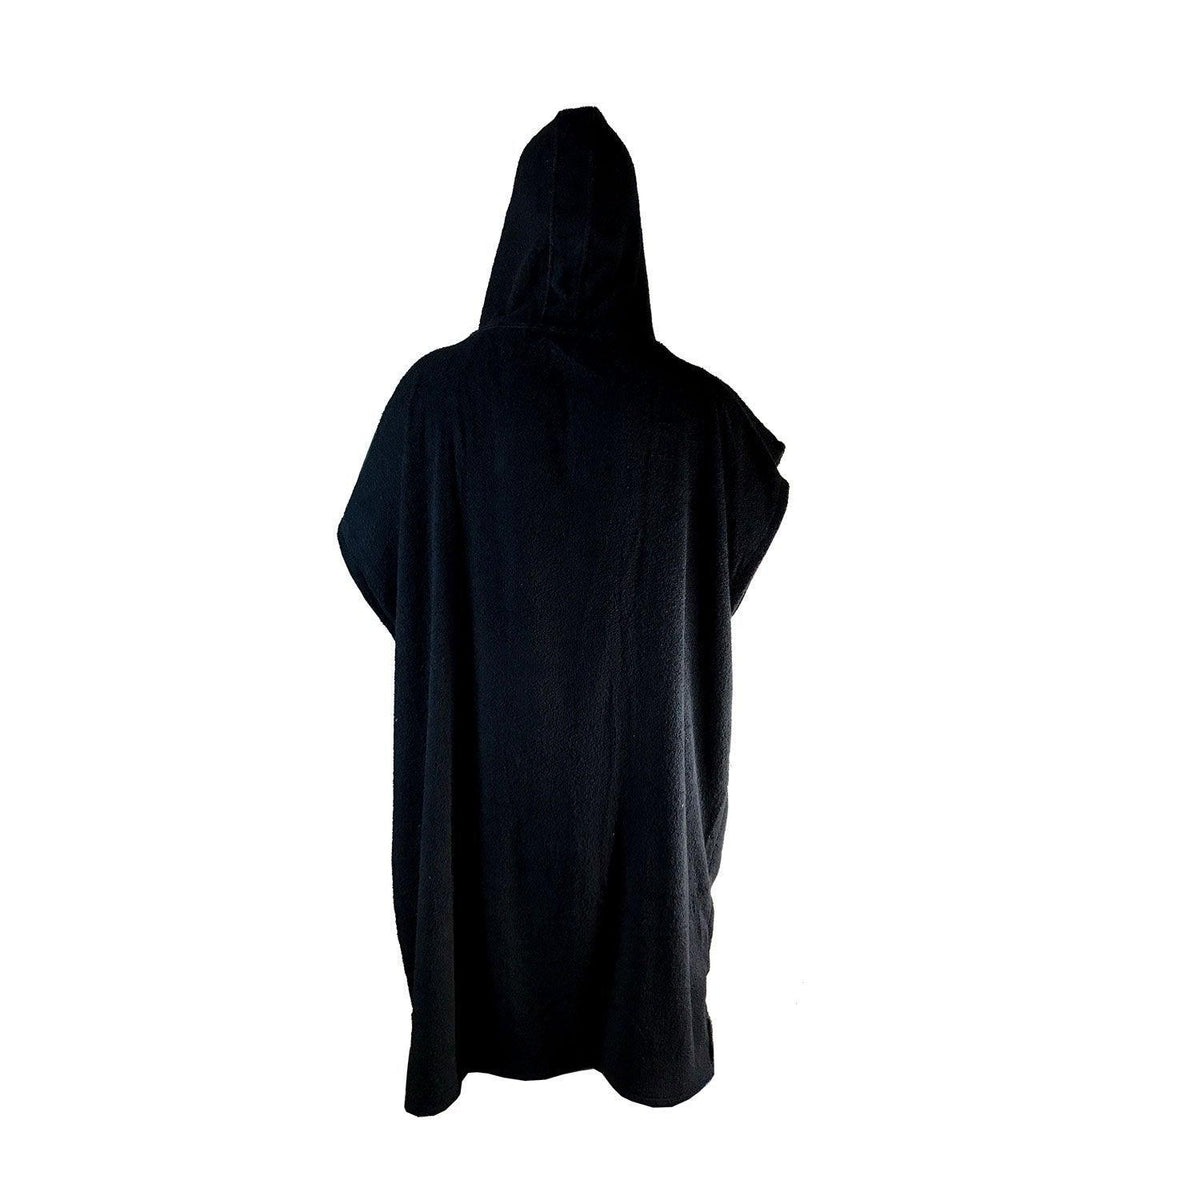 Limited Edition Poncho Towel - Black and White - Funkshen Bodyboards